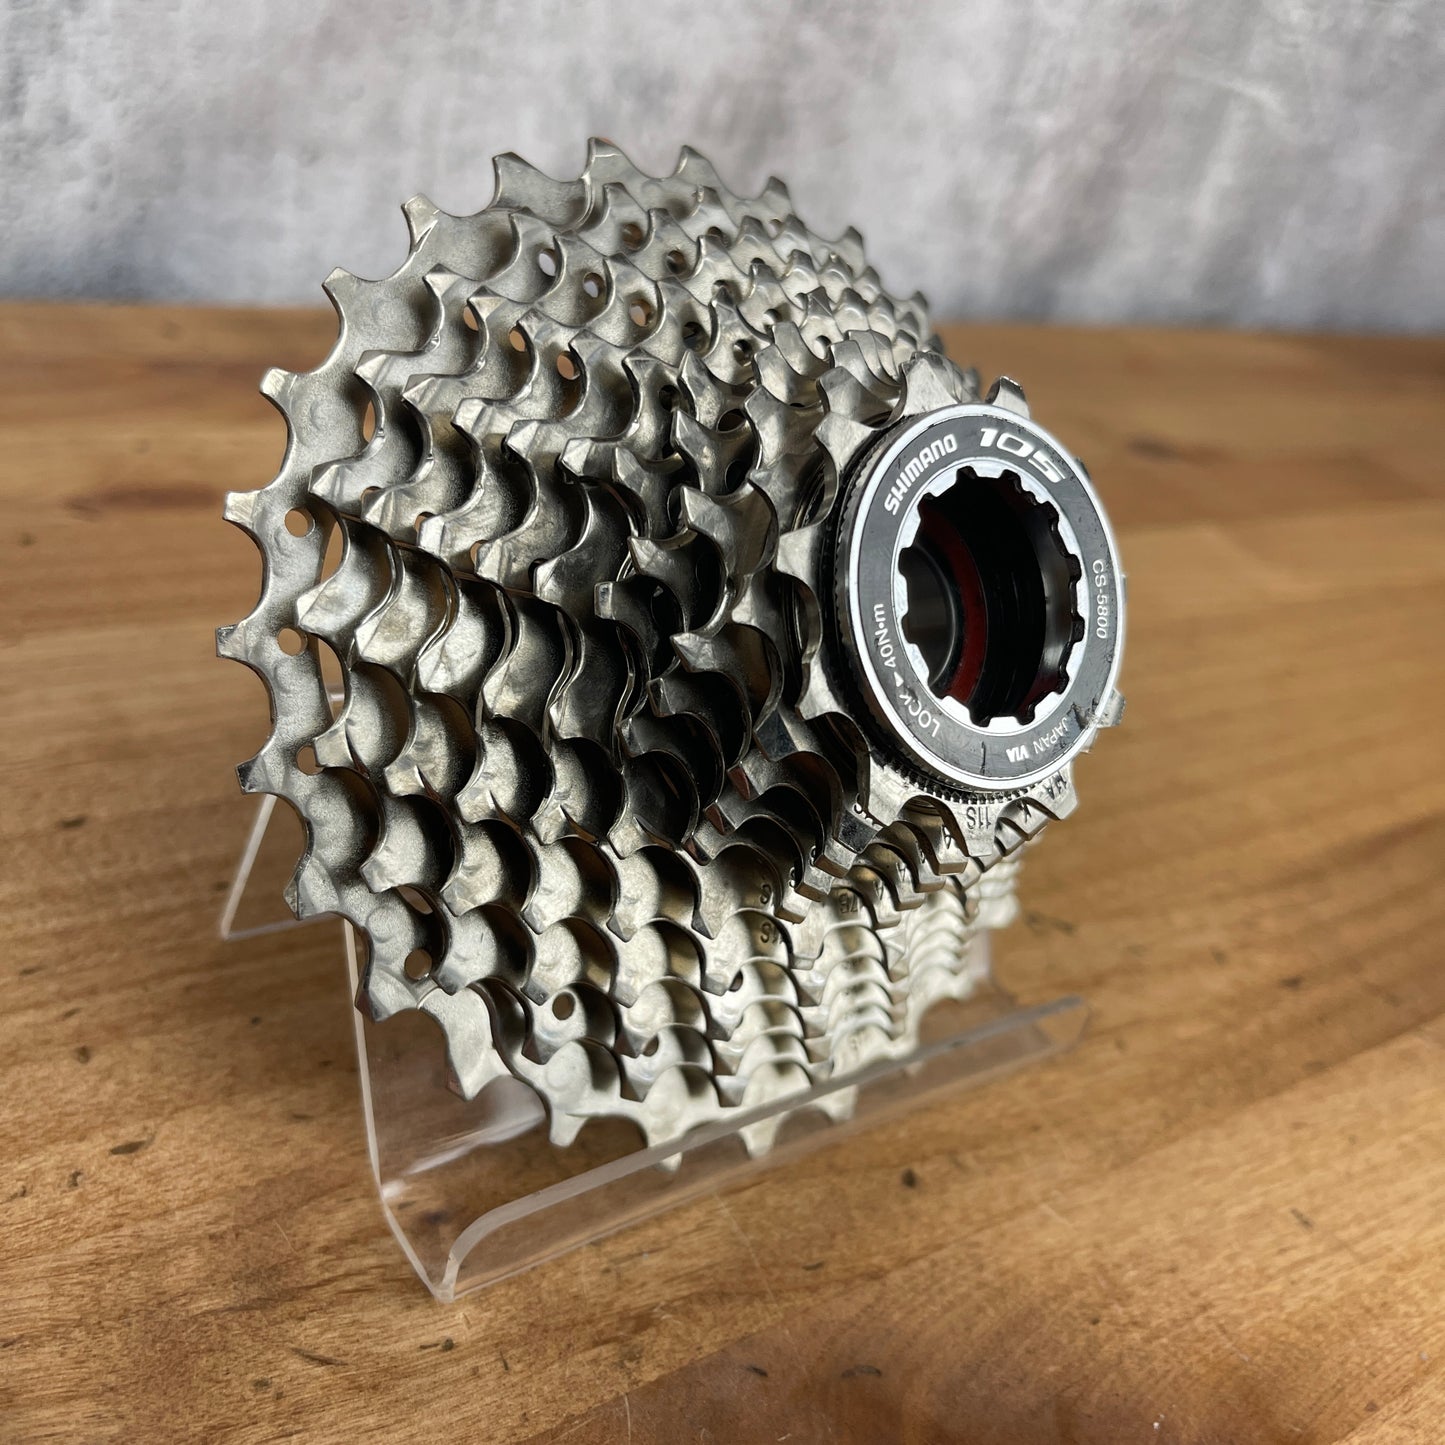 Shimano 105 CS-5800 11-28t 11-Speed Bicycle Cassette "Typical Wear" 276g